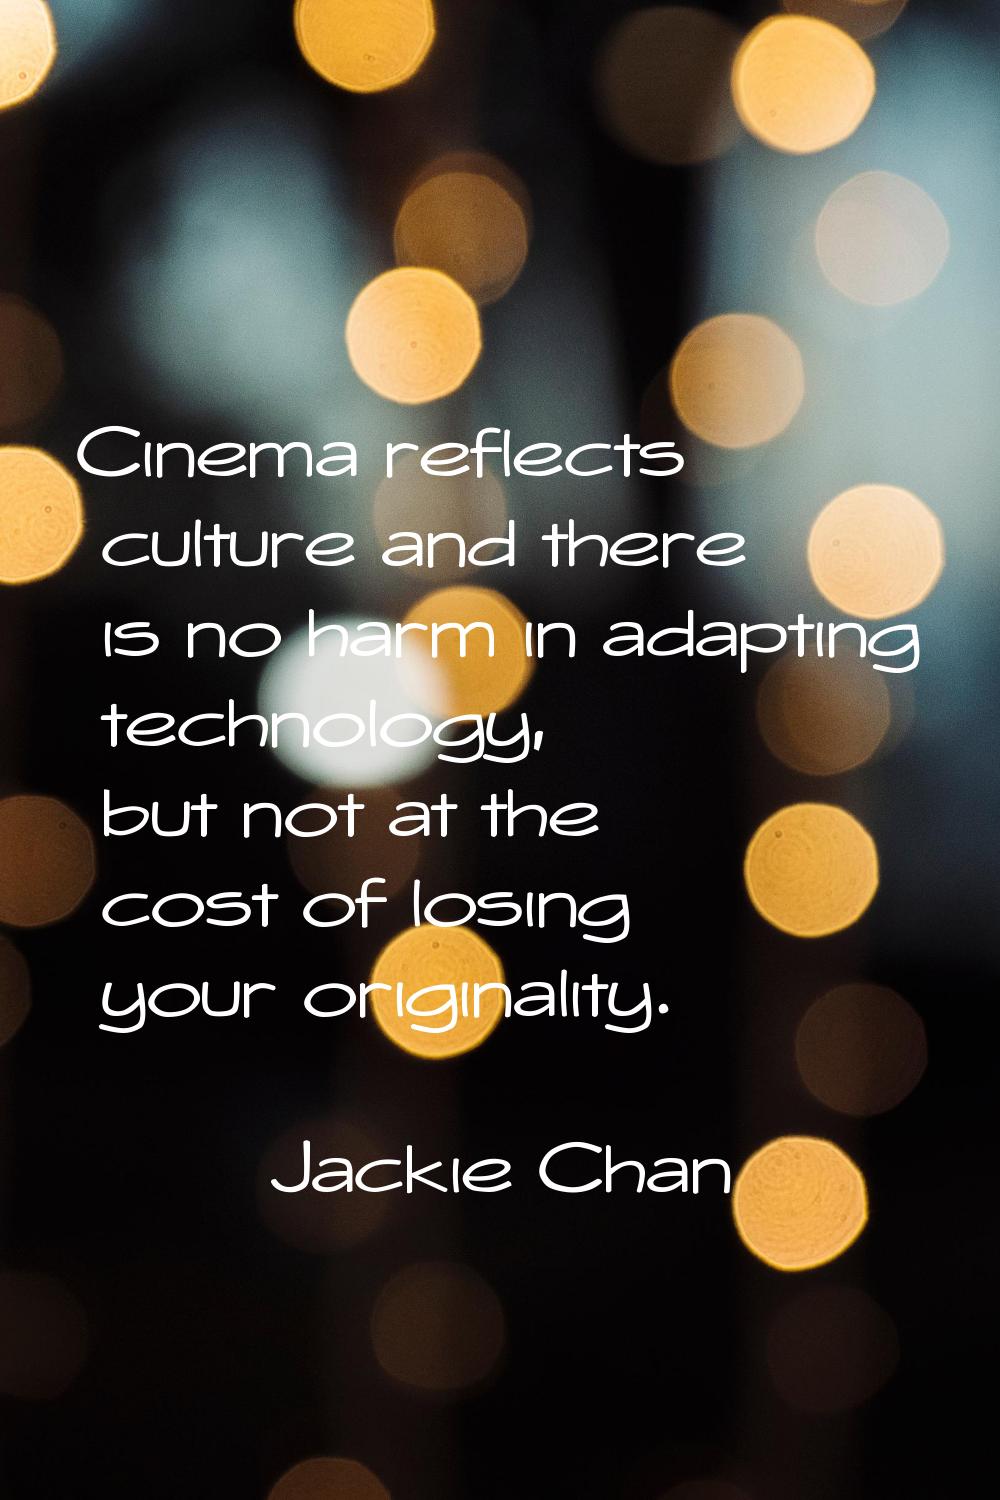 Cinema reflects culture and there is no harm in adapting technology, but not at the cost of losing 